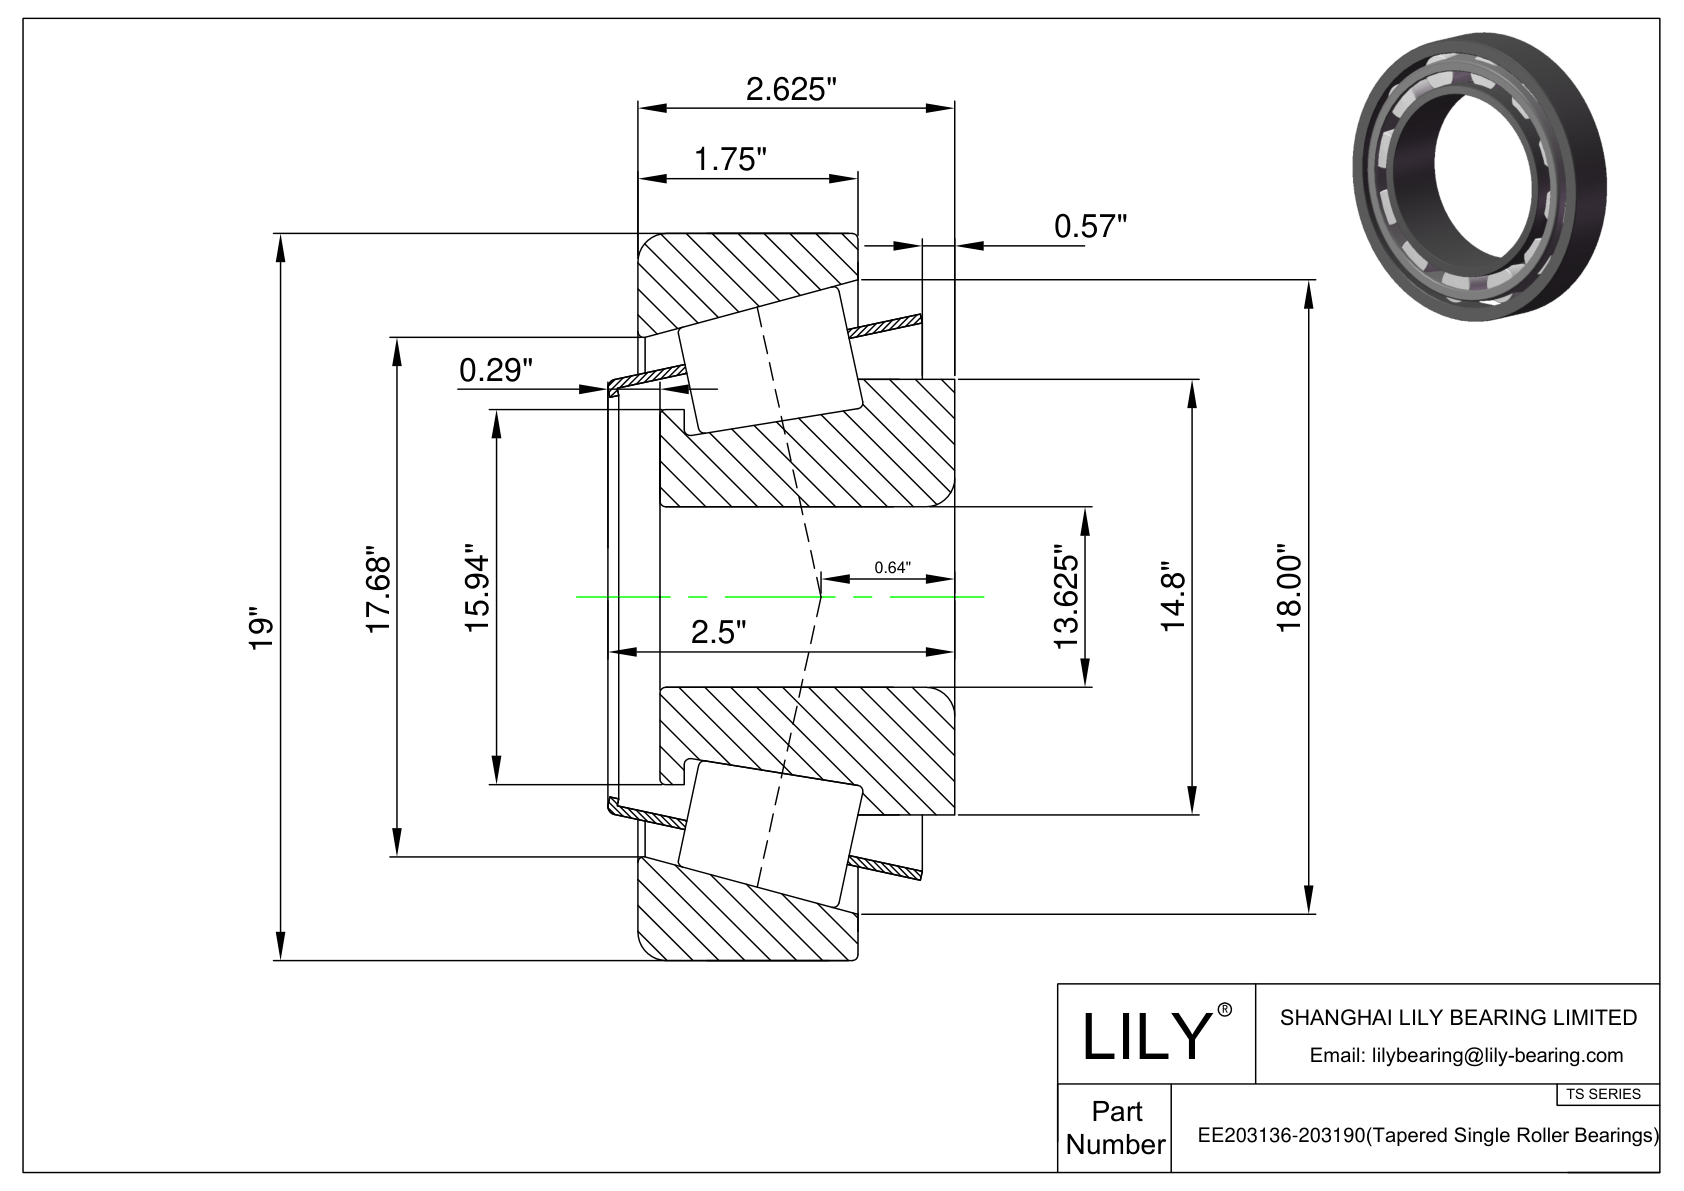 EE203136-203190 TS (Tapered Single Roller Bearings) (Imperial) cad drawing